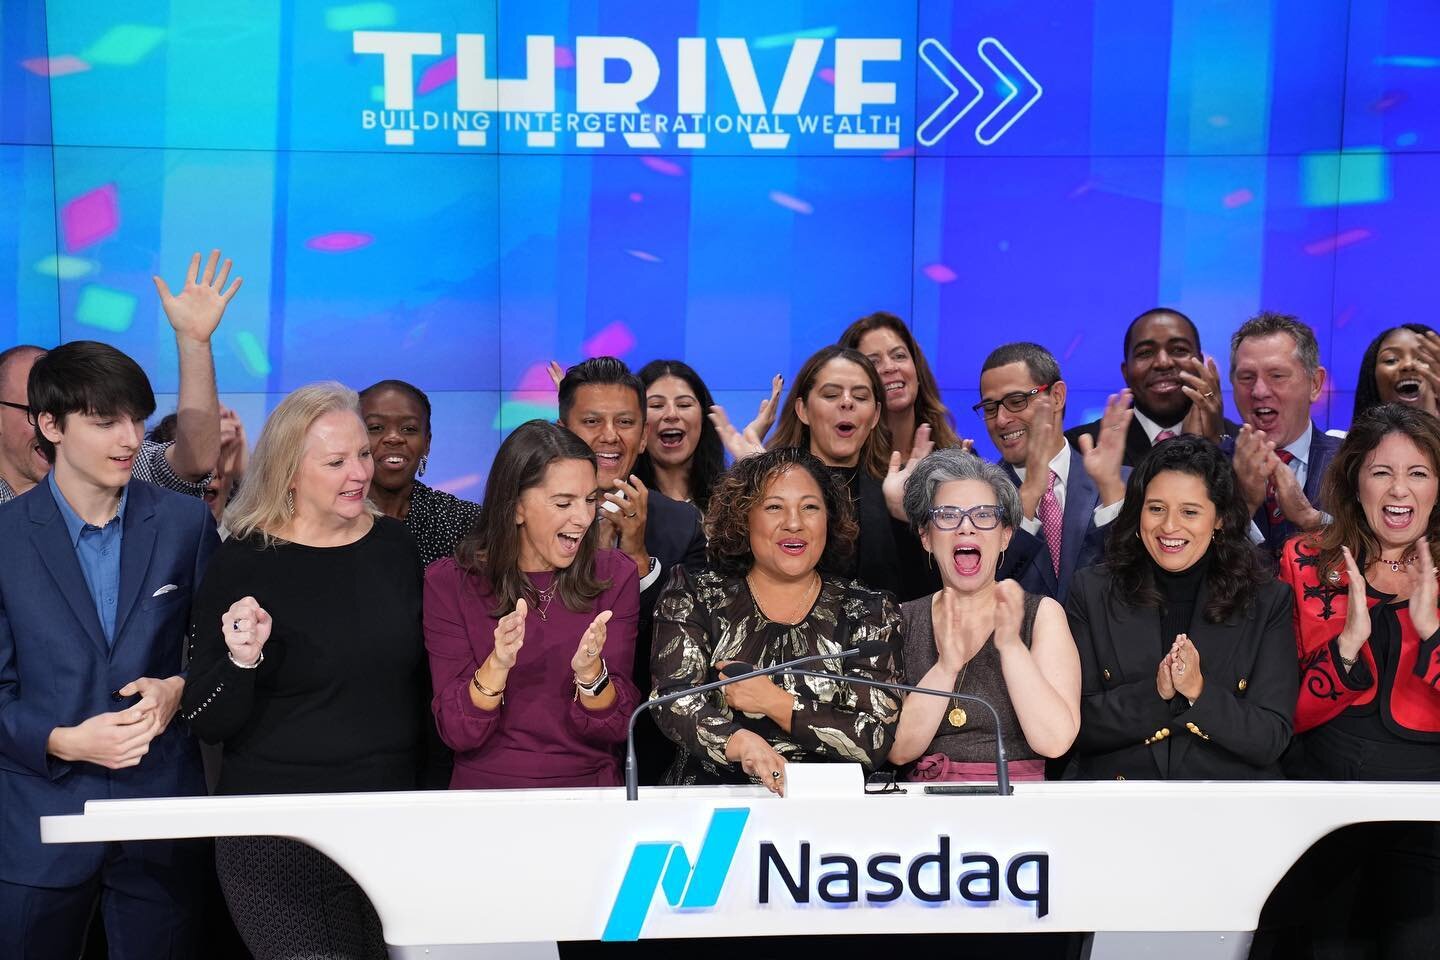 What an honor! Ringing in the capital markets this morning for THRIVE @mymoneymyfuture with @nasdaq Foundation. 

##hispanicheritagemonth